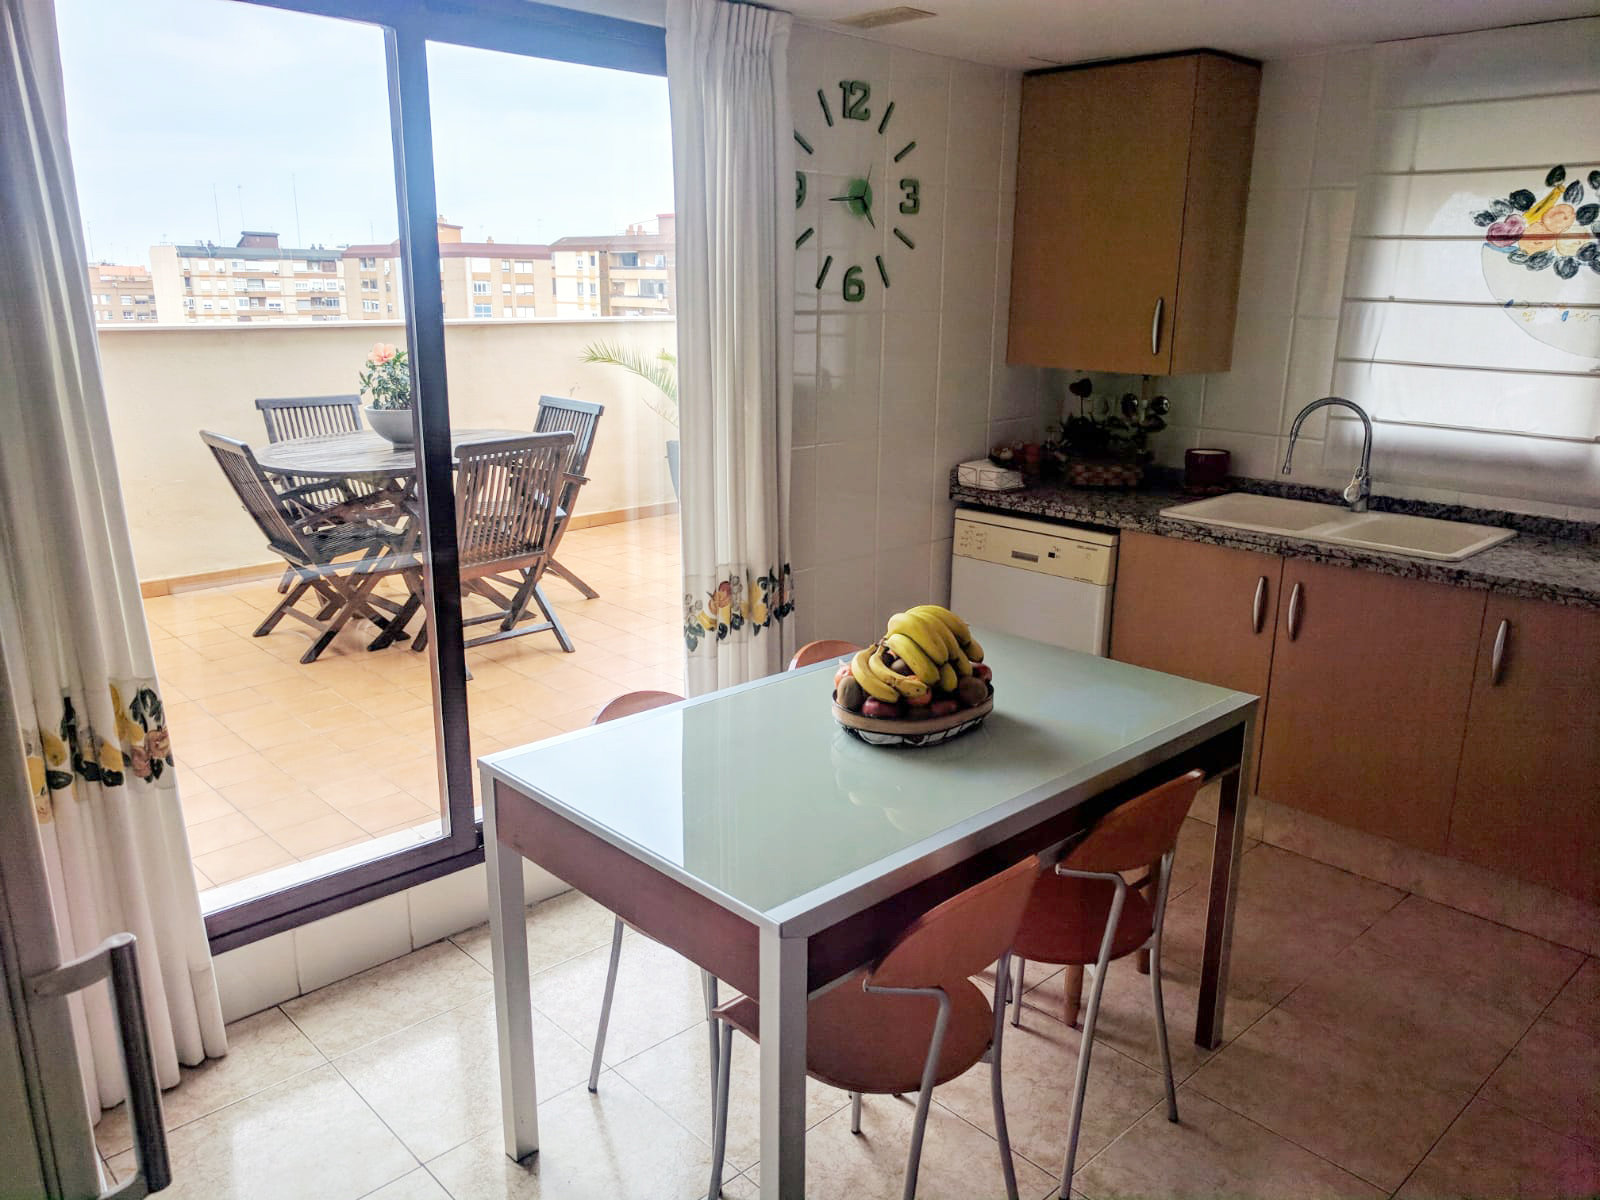 Kitchen in student apartment in Valencia, Spain.